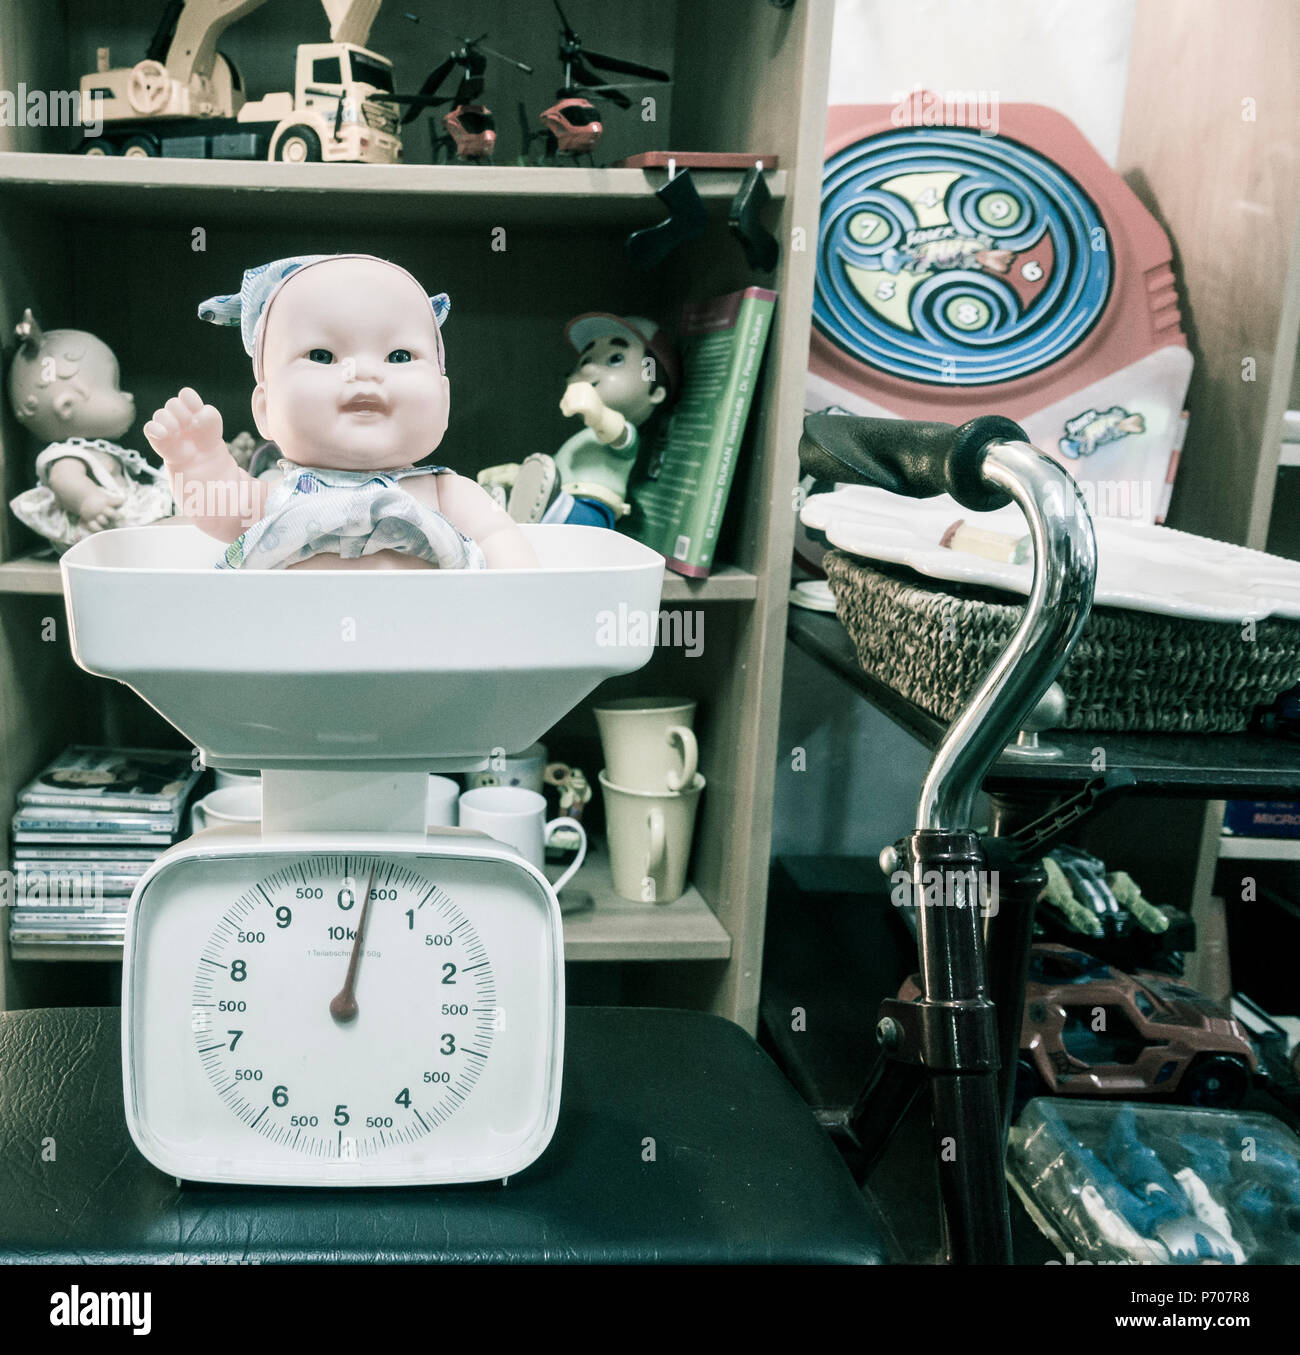 Baby doll on scales in charity shop. Stock Photo